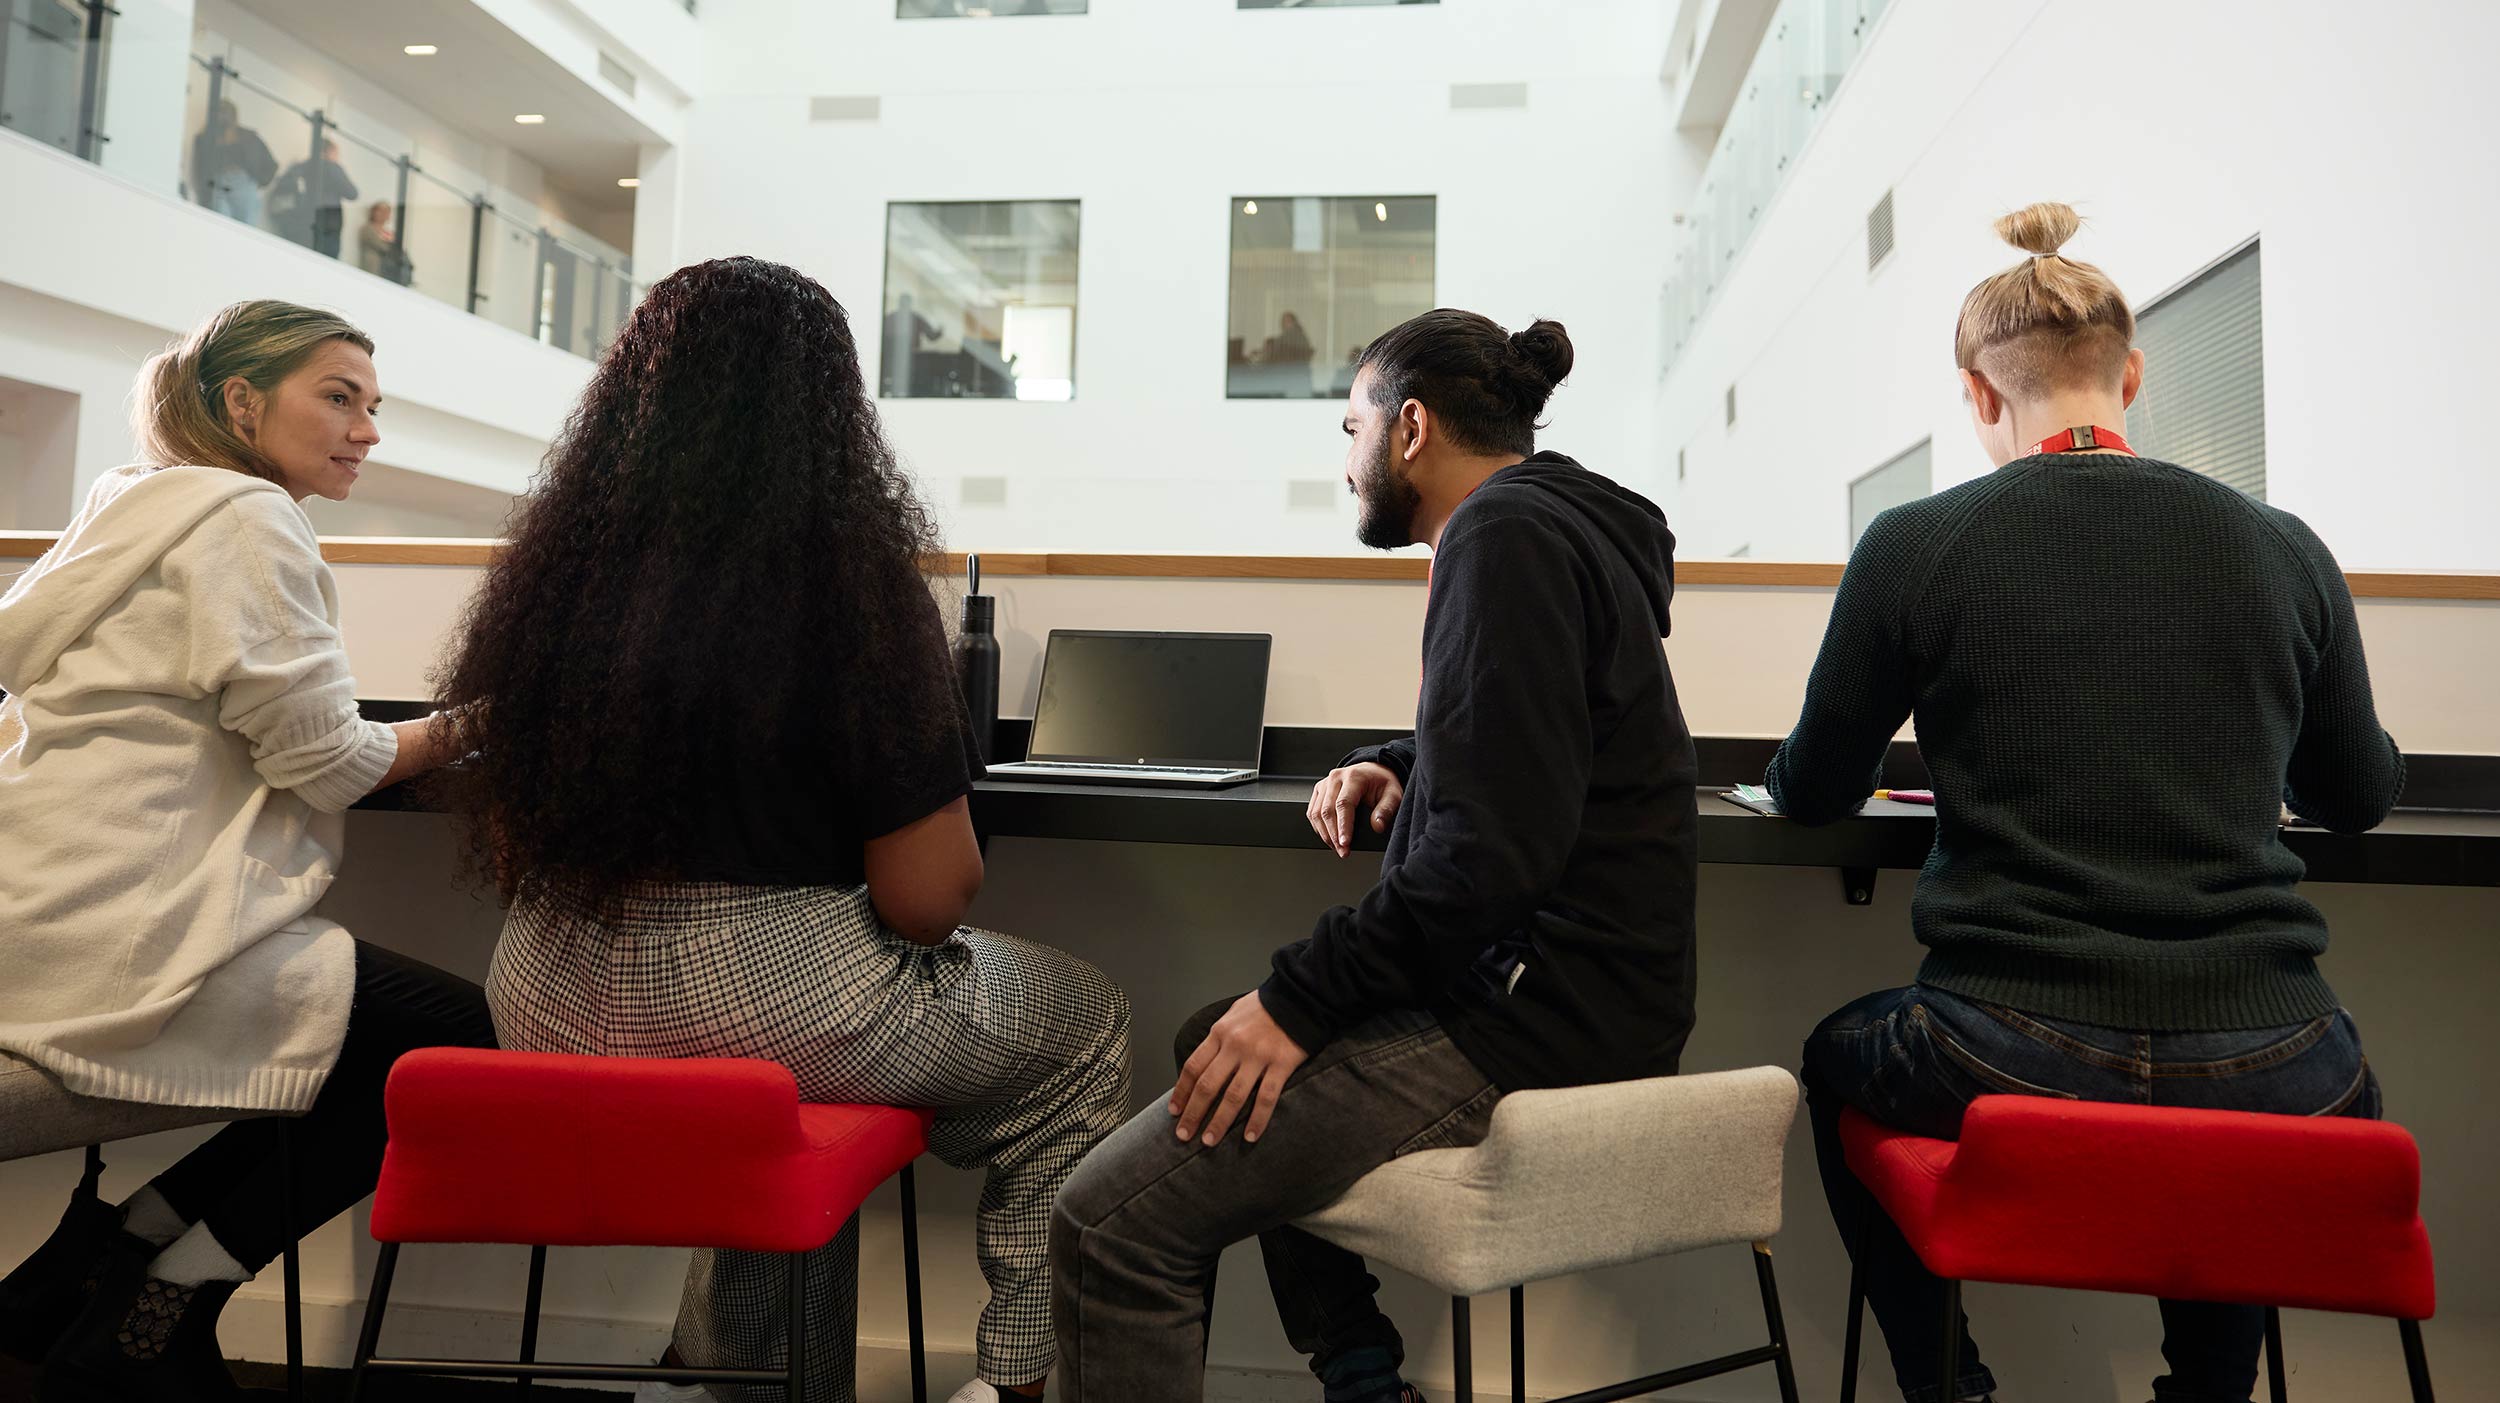 Four students sit on stools in the informal working space in the Senate building on the University of Northampton campus. They have laptops on the ledge in front of them and look out over the Senate atrium with glass walled teaching spaces in the background